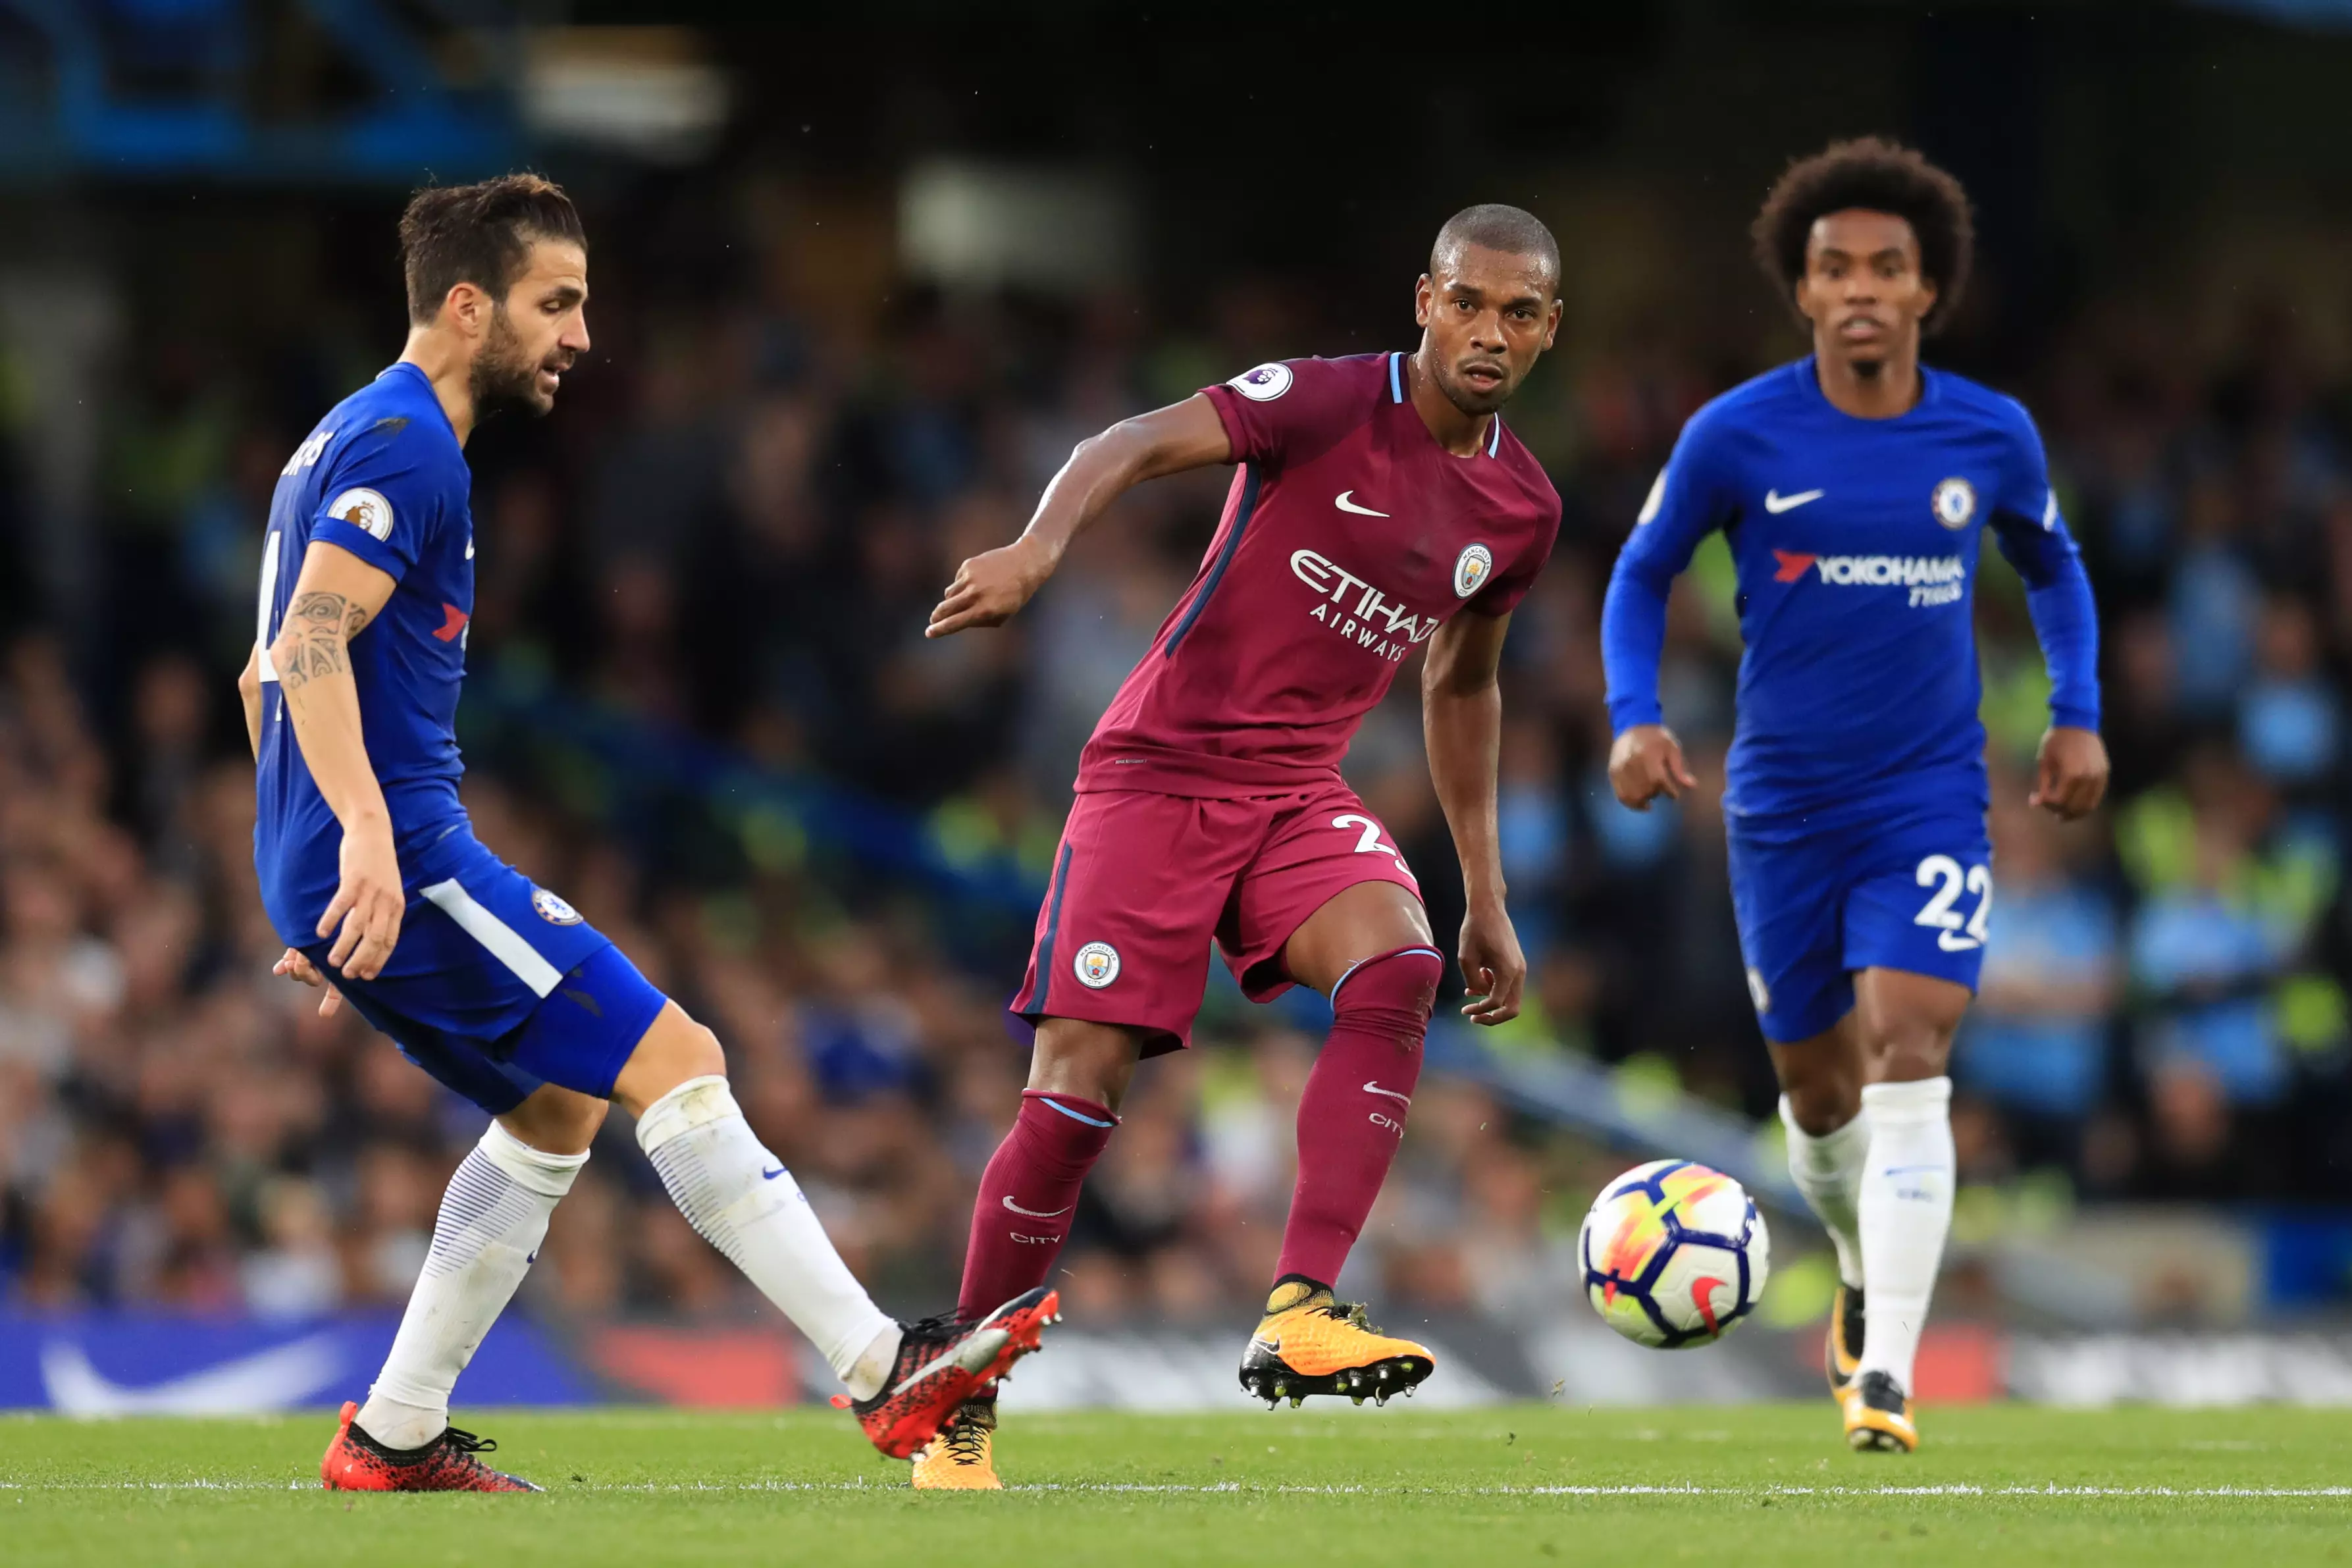 Fernandinho has been brilliant for City this season. Image: PA Images